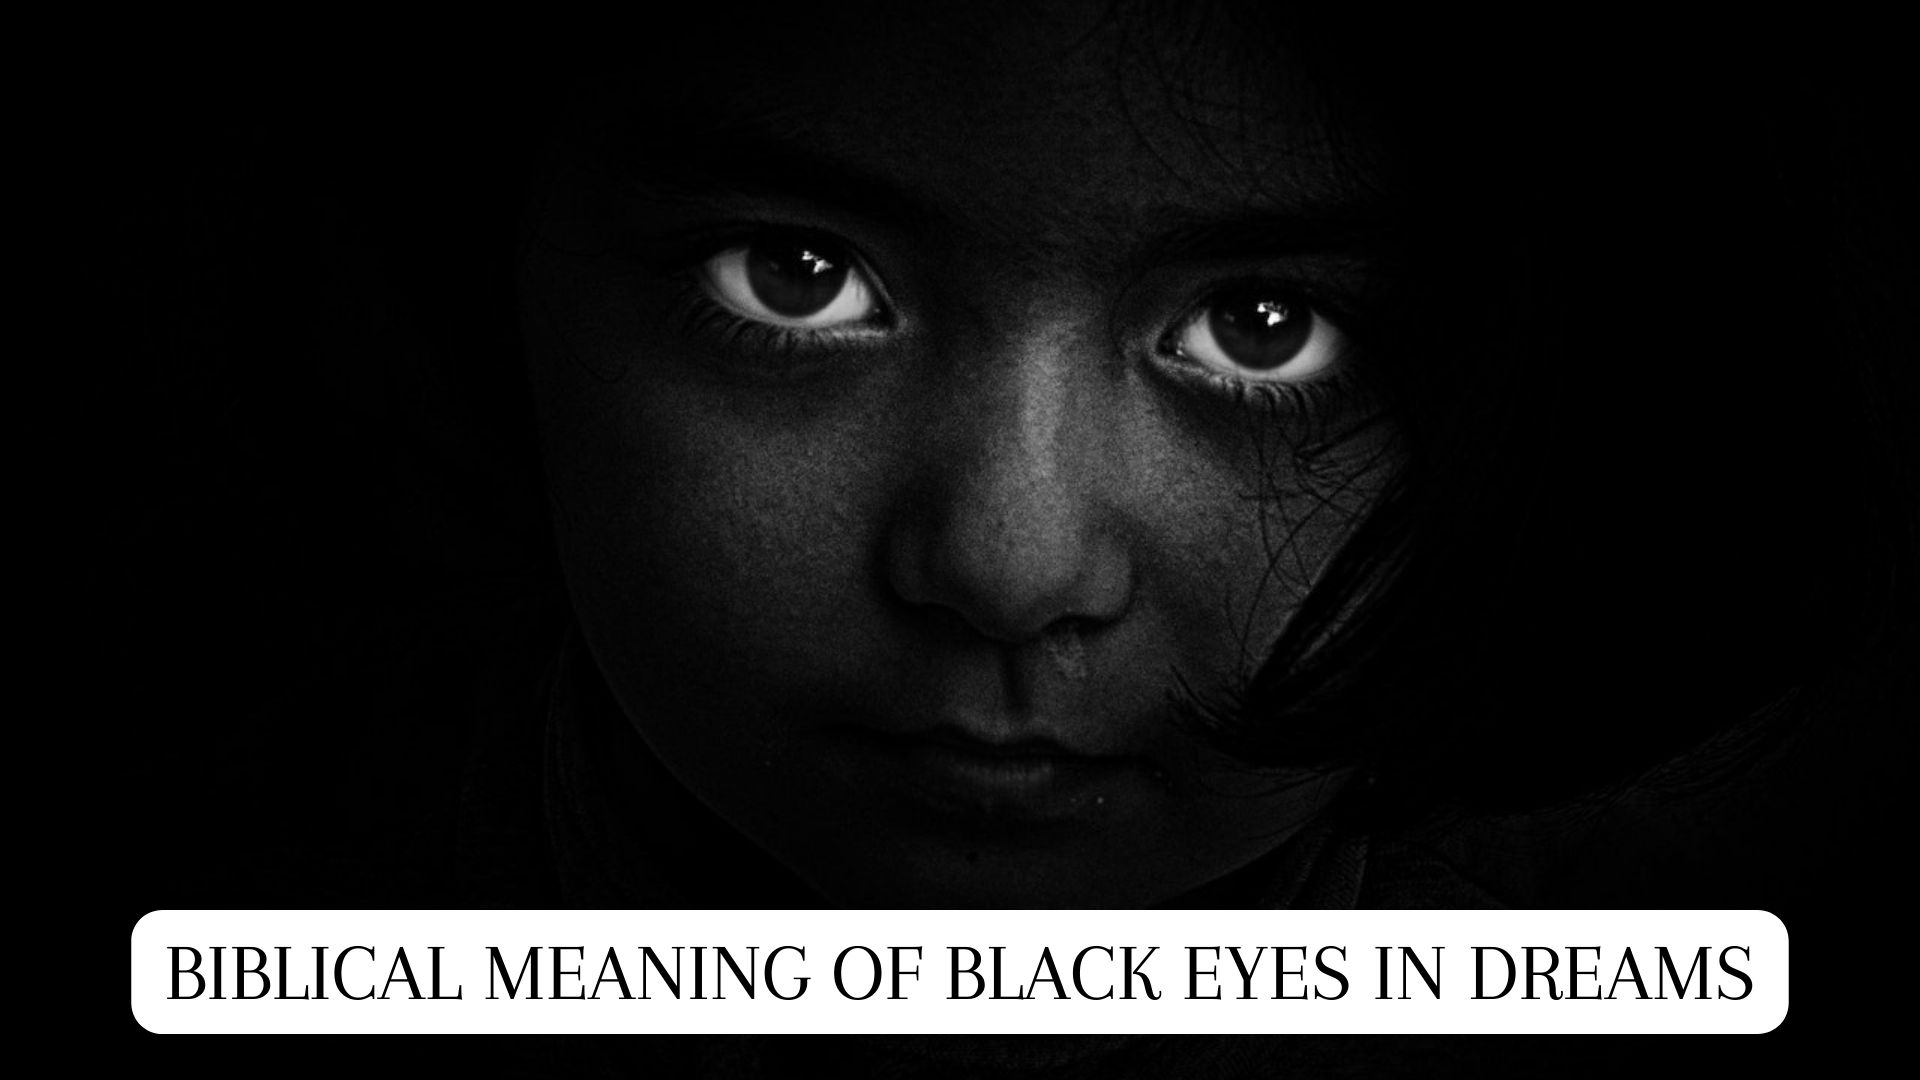 What Is The Biblical Meaning Of Black Eyes In Dreams?